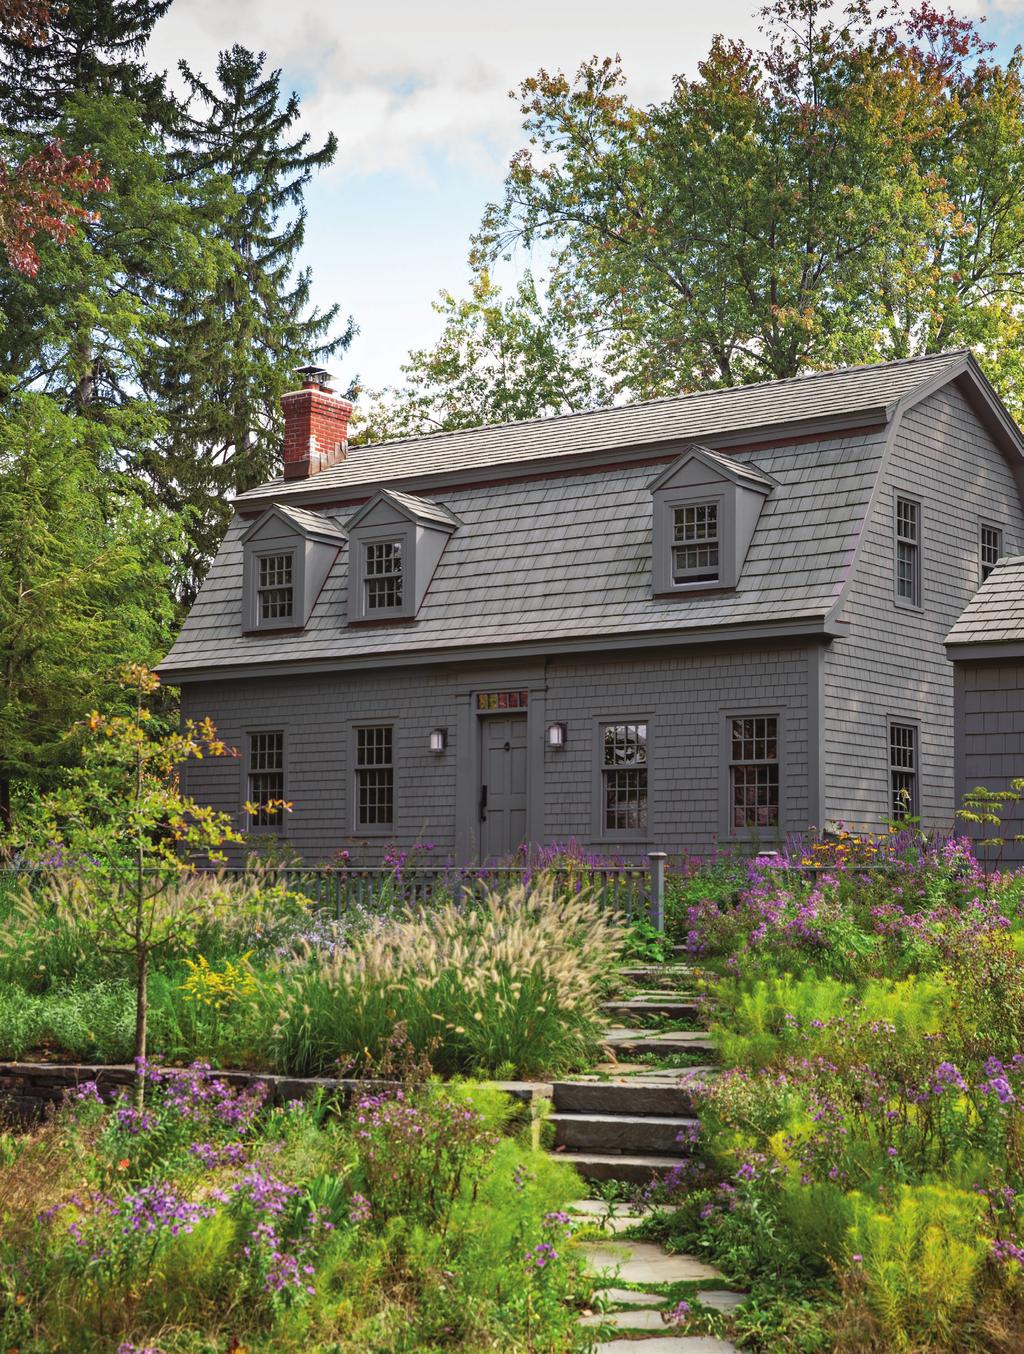 this photo: Restorative, flowing gardens adorn this half-acre property and embrace the historic roots of the home.